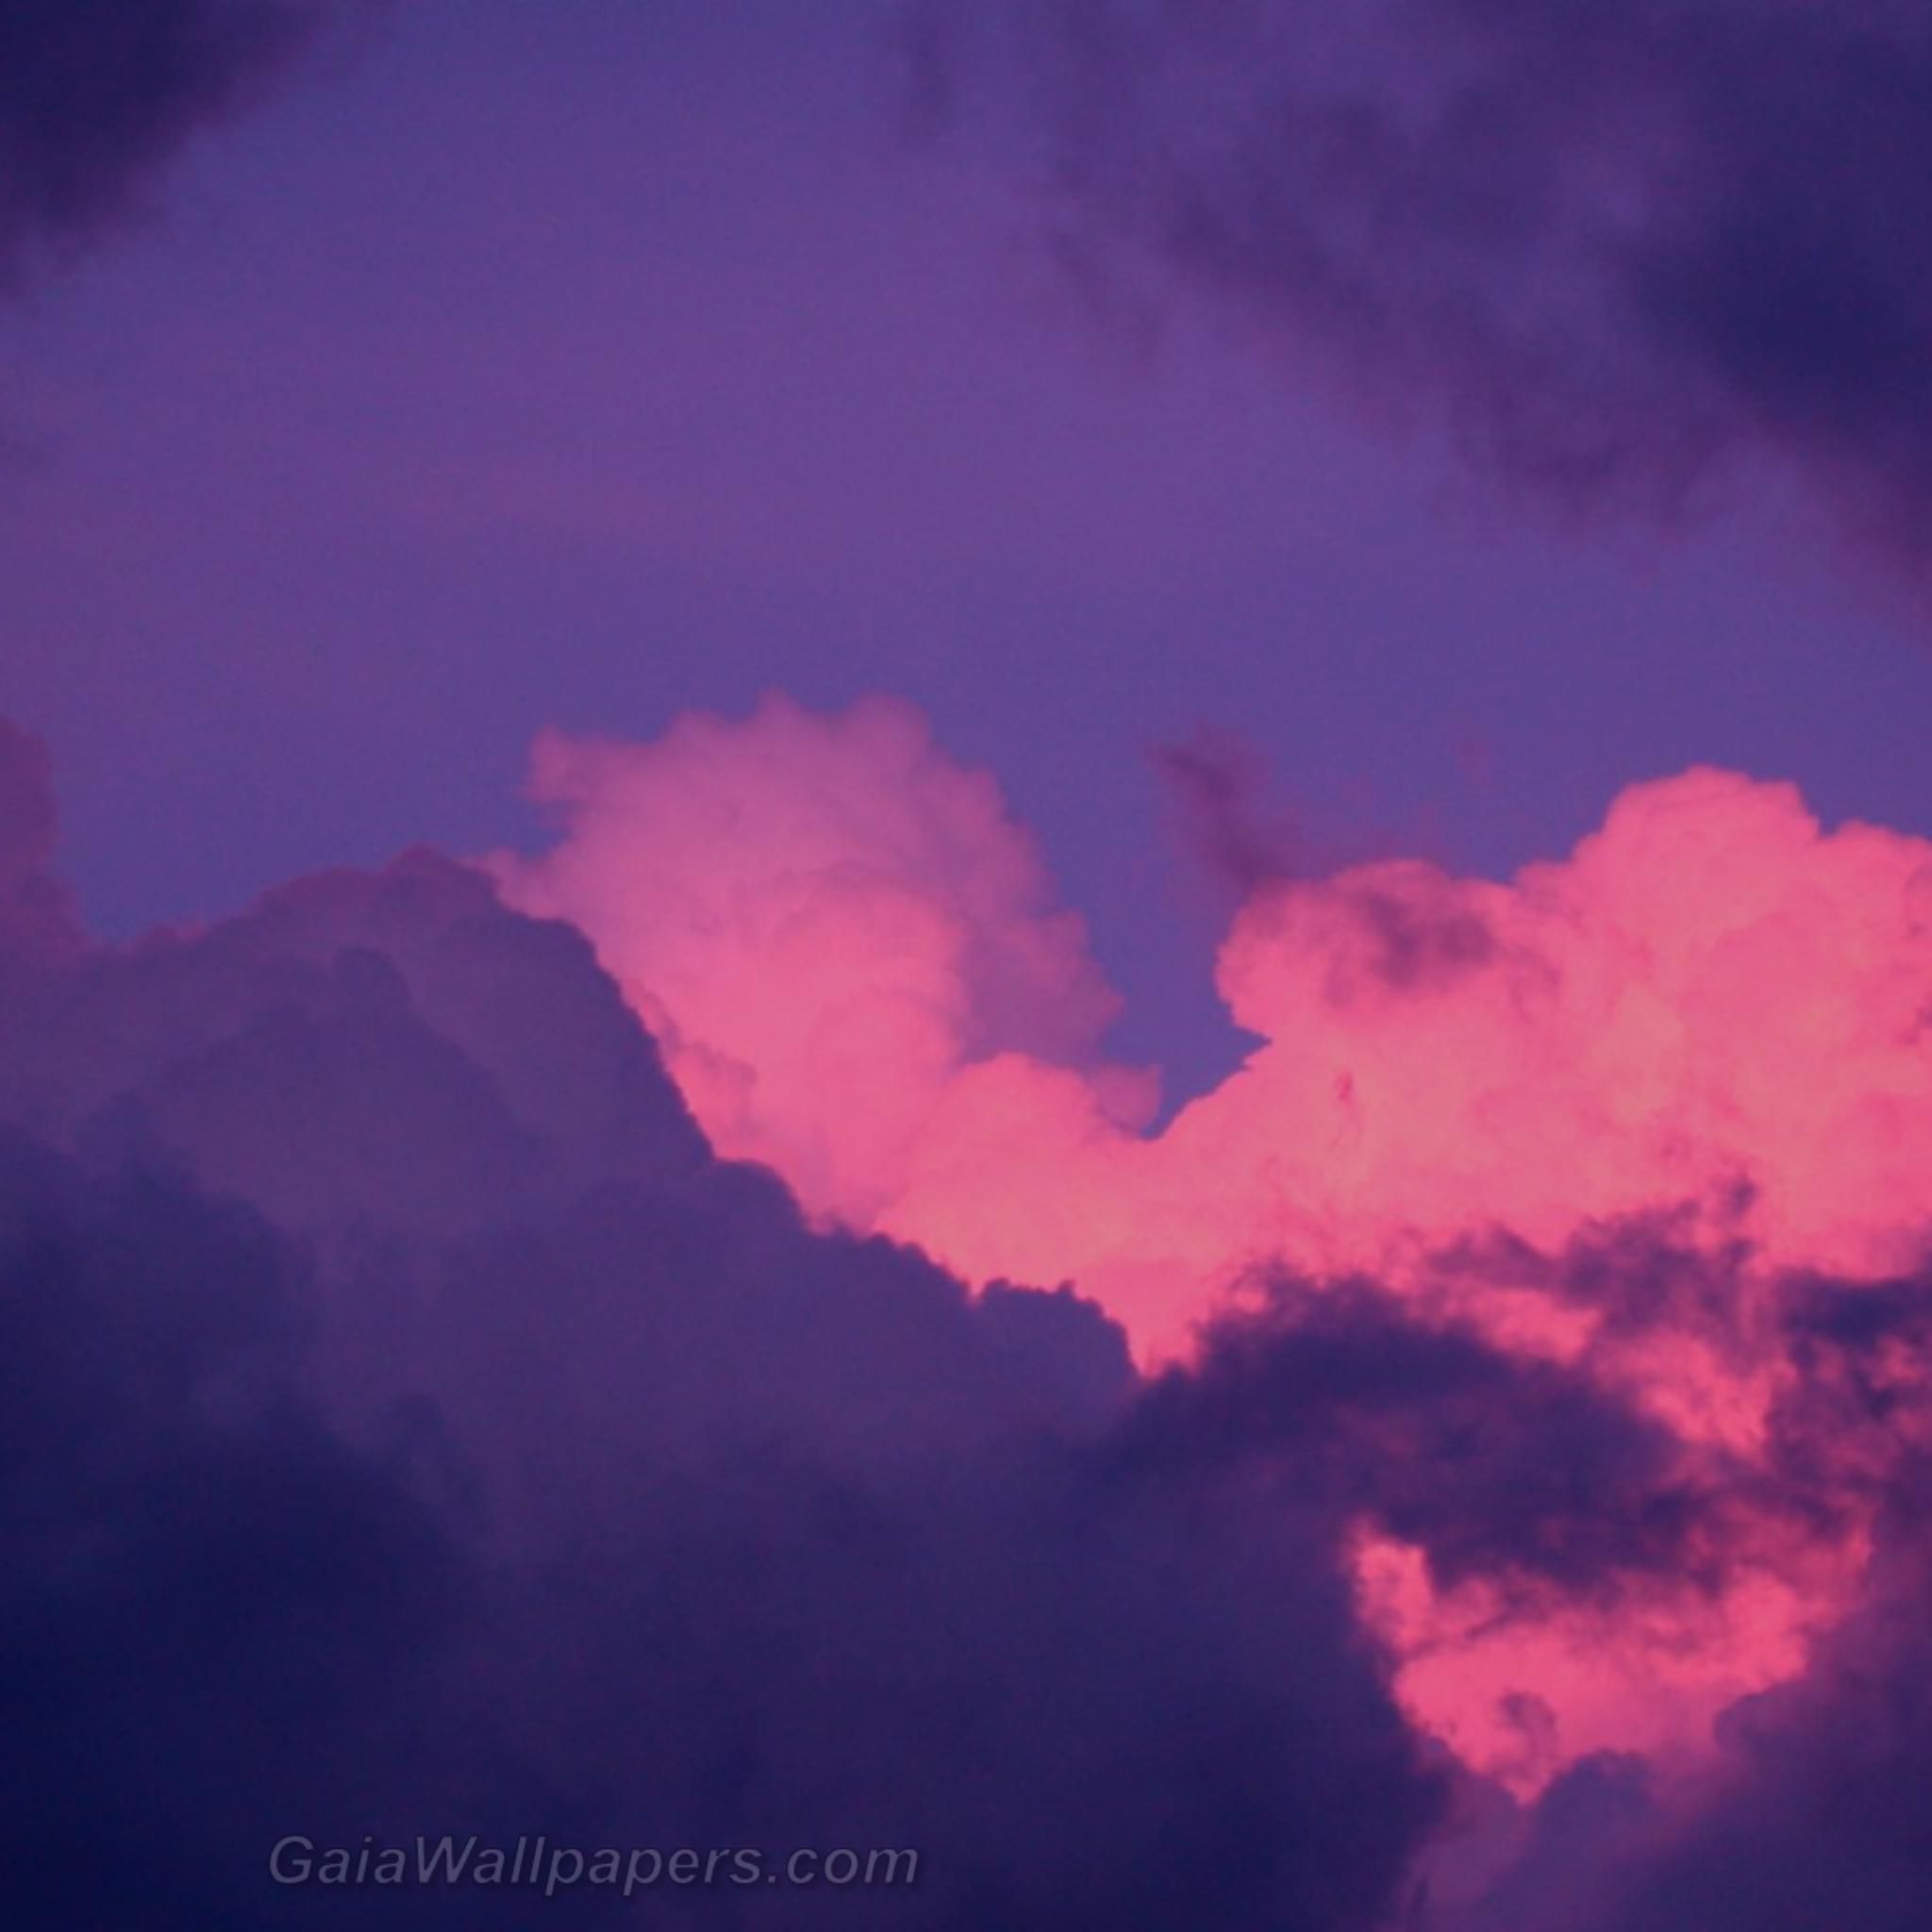 143000 Purple Clouds Stock Photos Pictures  RoyaltyFree Images   iStock  Pink purple clouds Orange purple clouds Purple clouds sunset